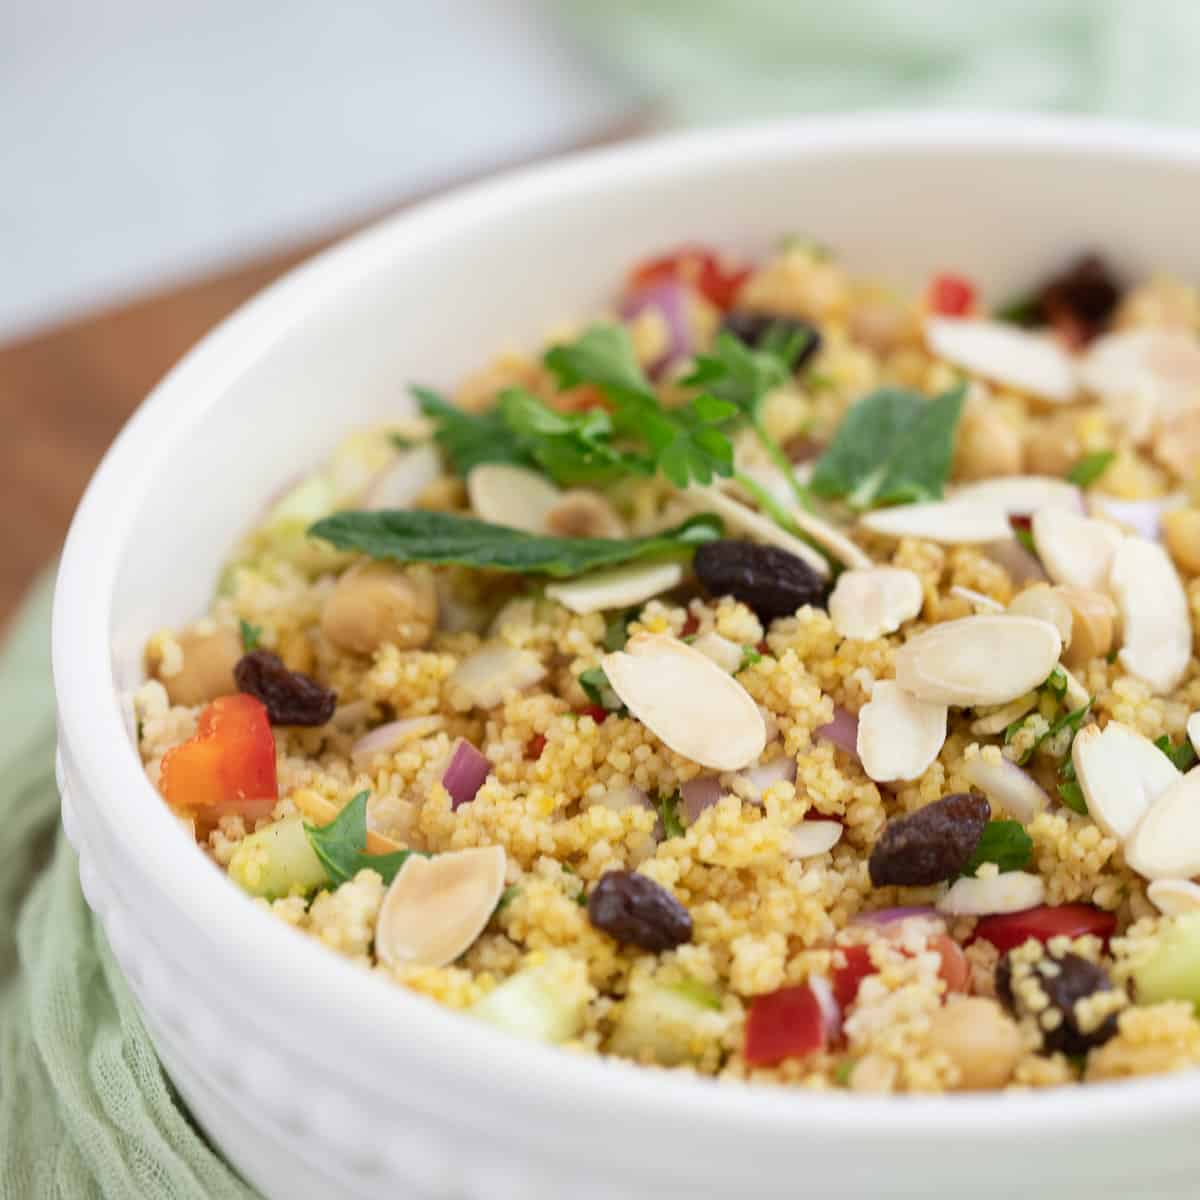 Couscous Moroccan Salad in white serving bowl.